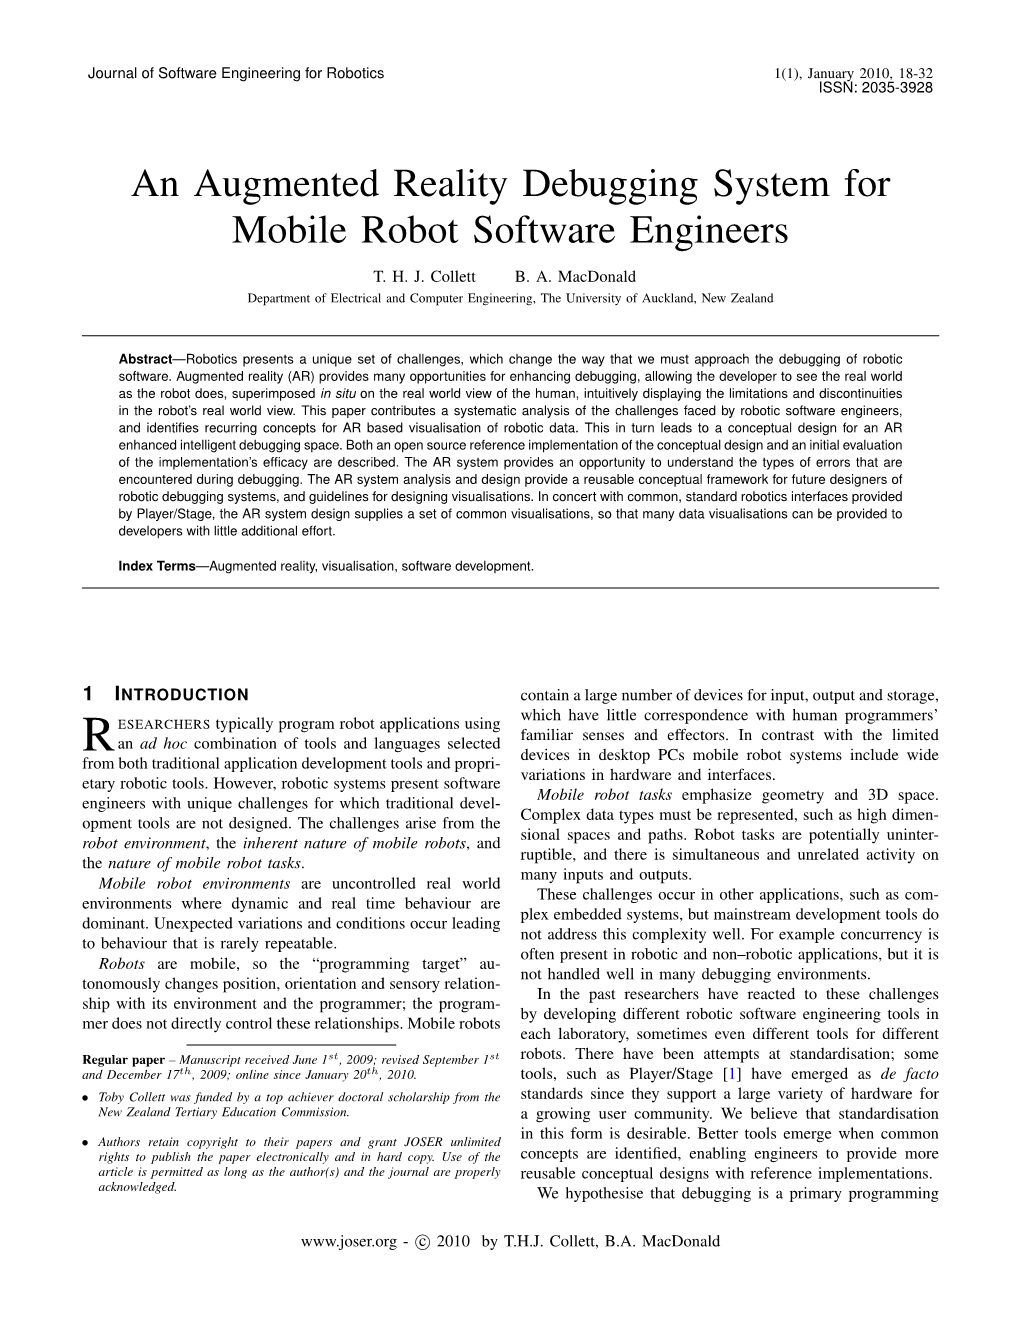 An Augmented Reality Debugging System for Mobile Robot Software Engineers